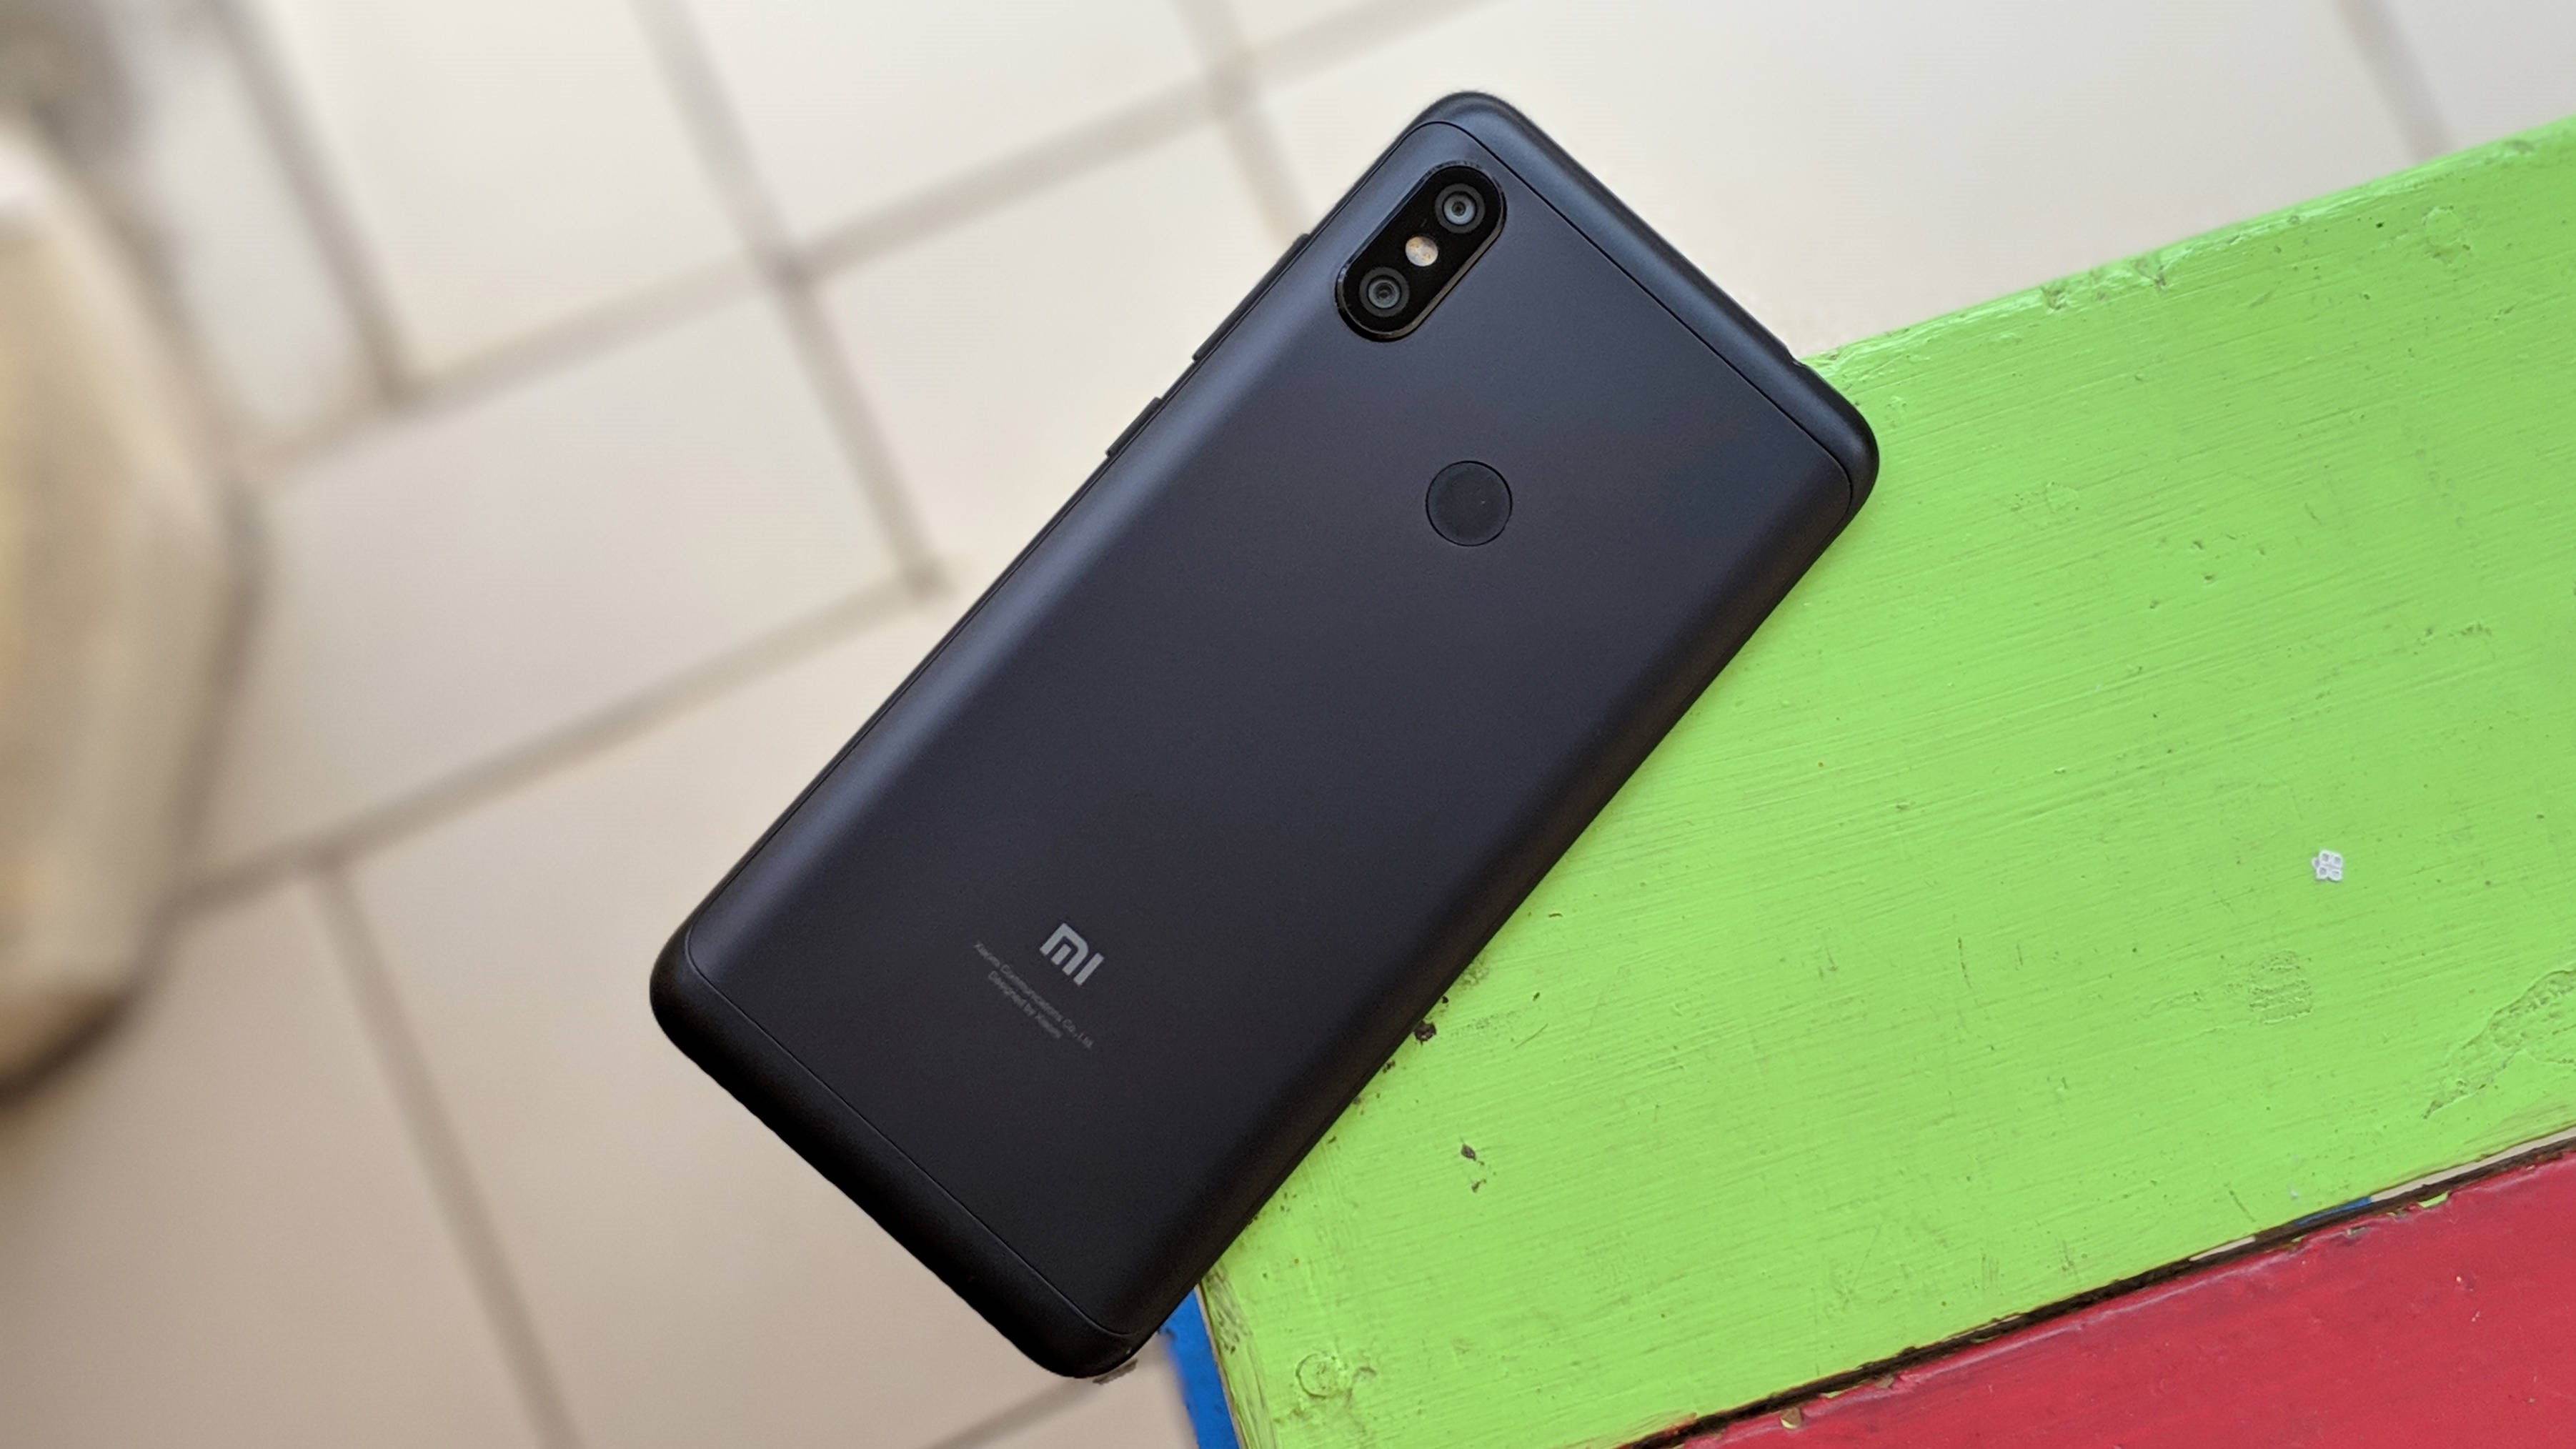 Photo of the backside of a black Redmi Note 6 Pro on a colorful table.